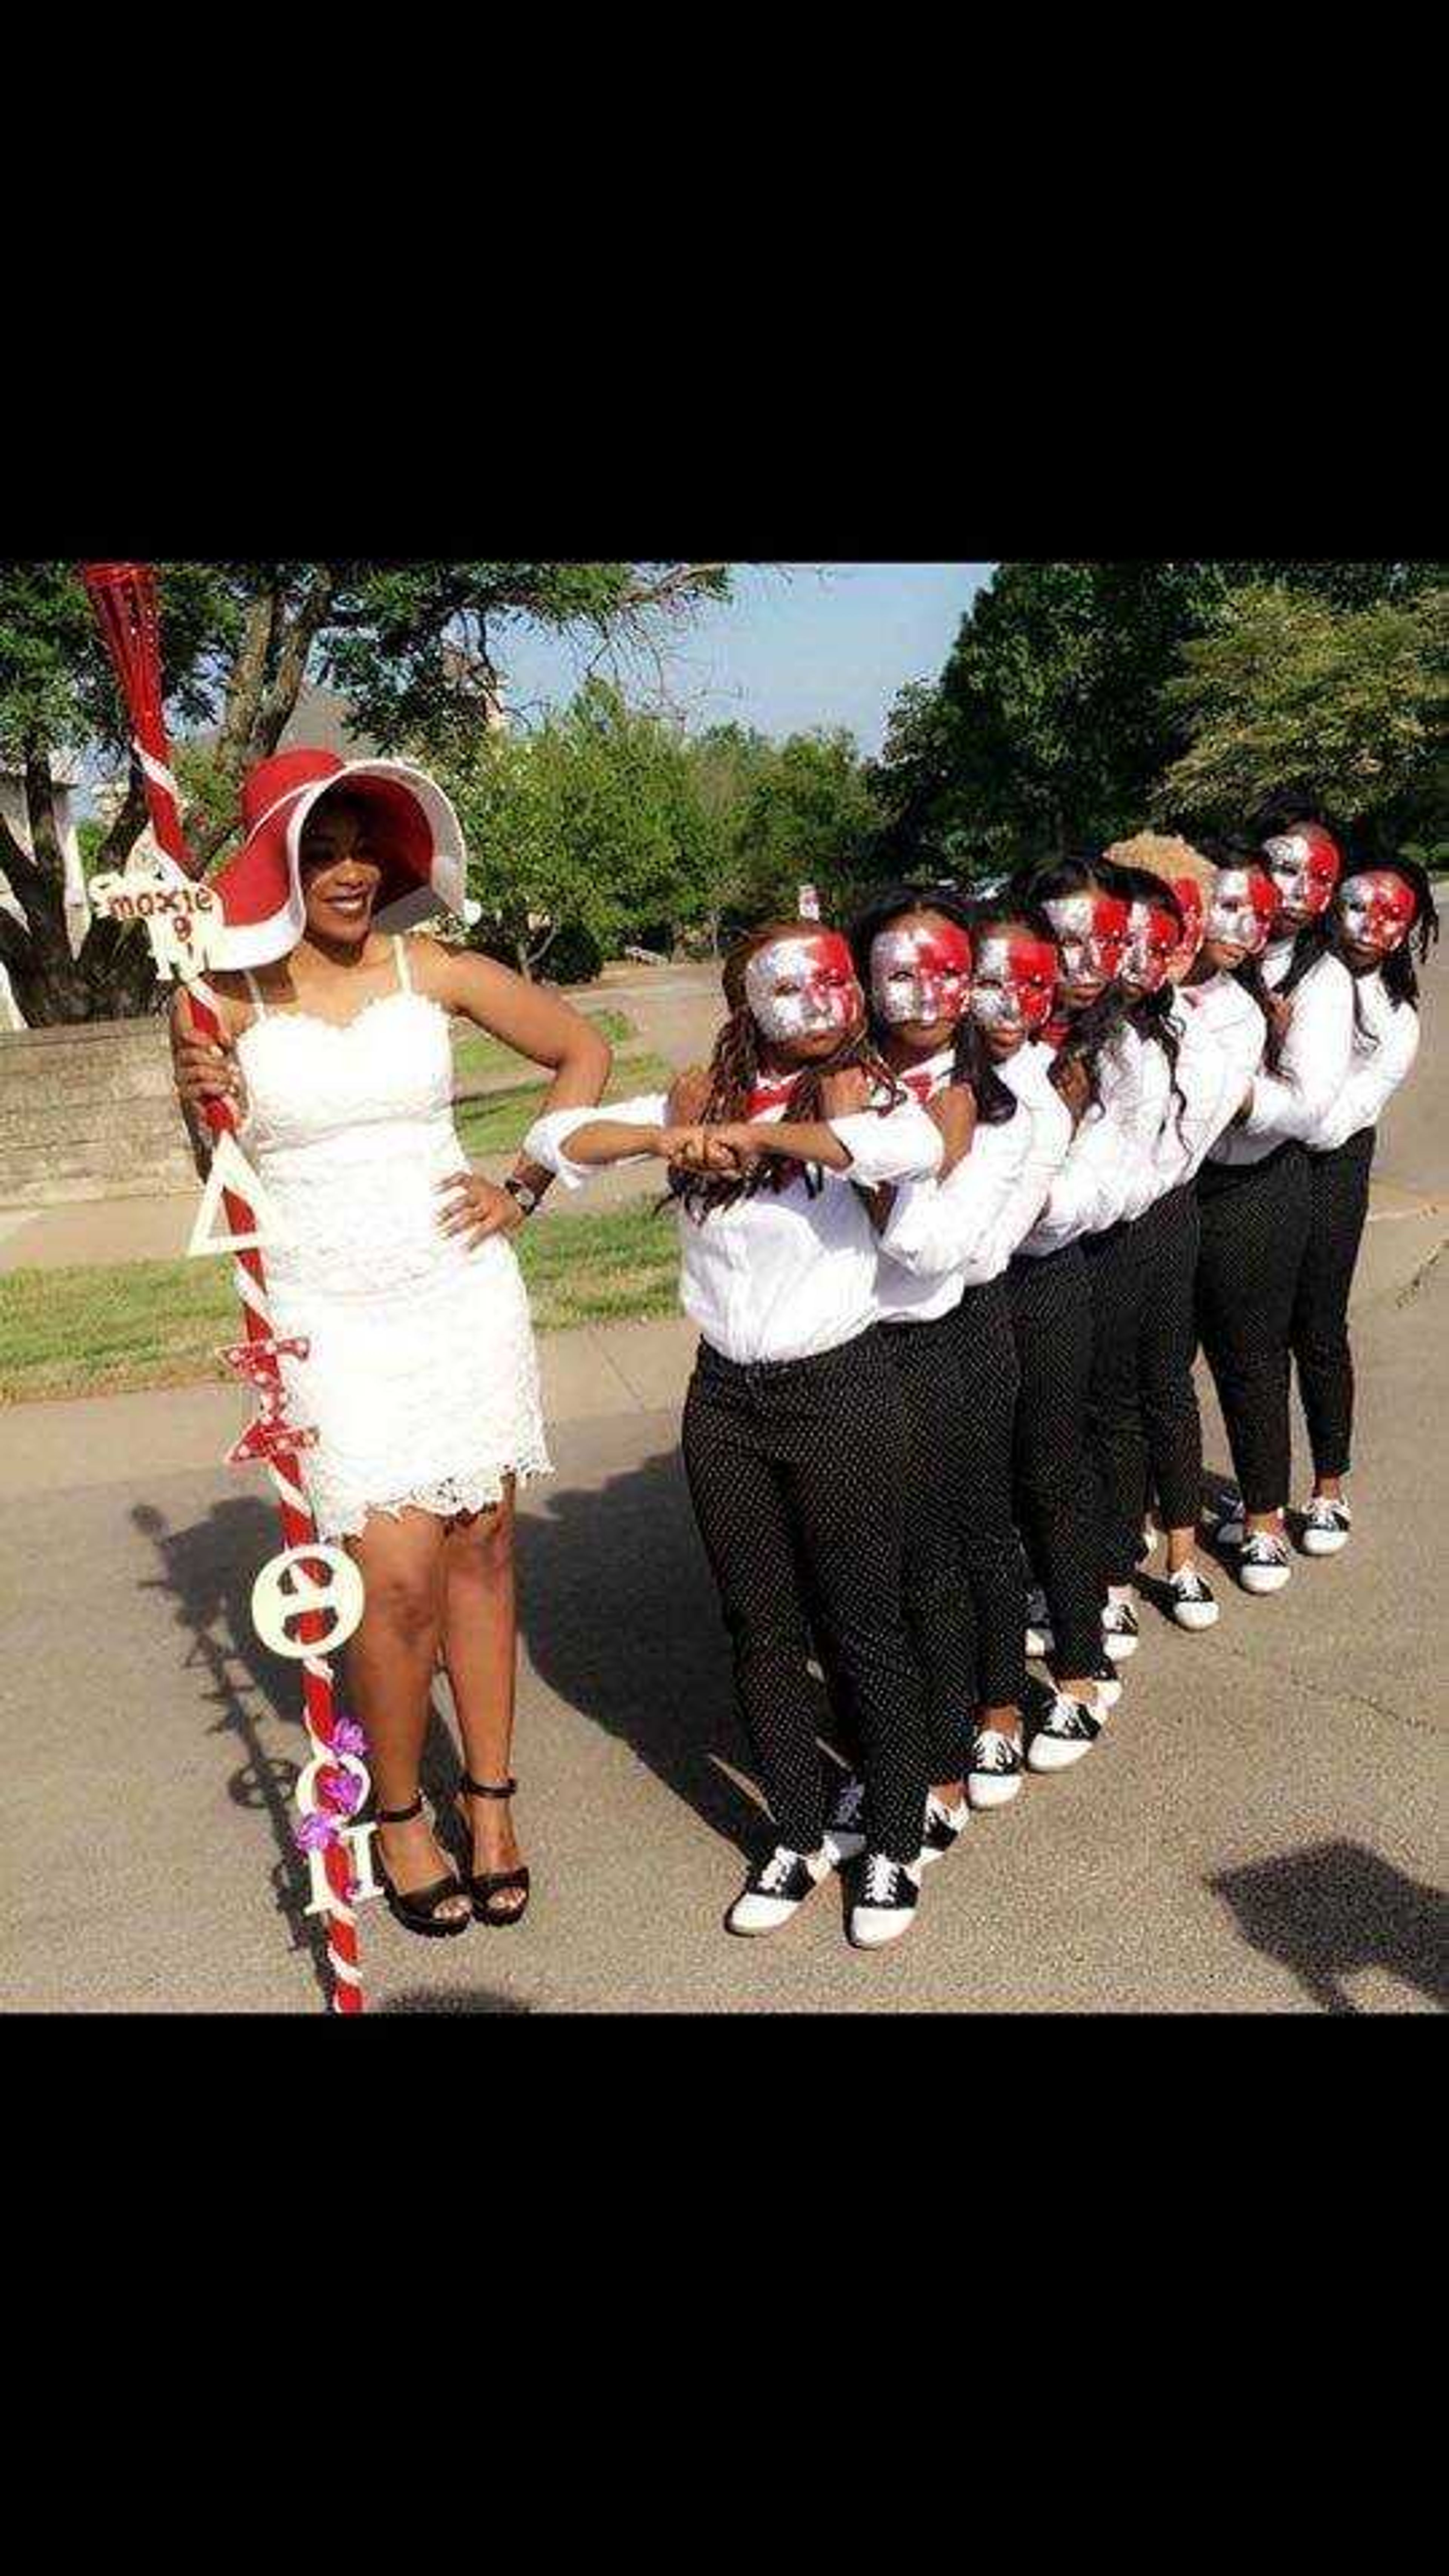 Delta Sigma Theta Sorority Inc.'s president, Kamille Pressley, stands alongside the new members of the Omicron Pi Chapter.